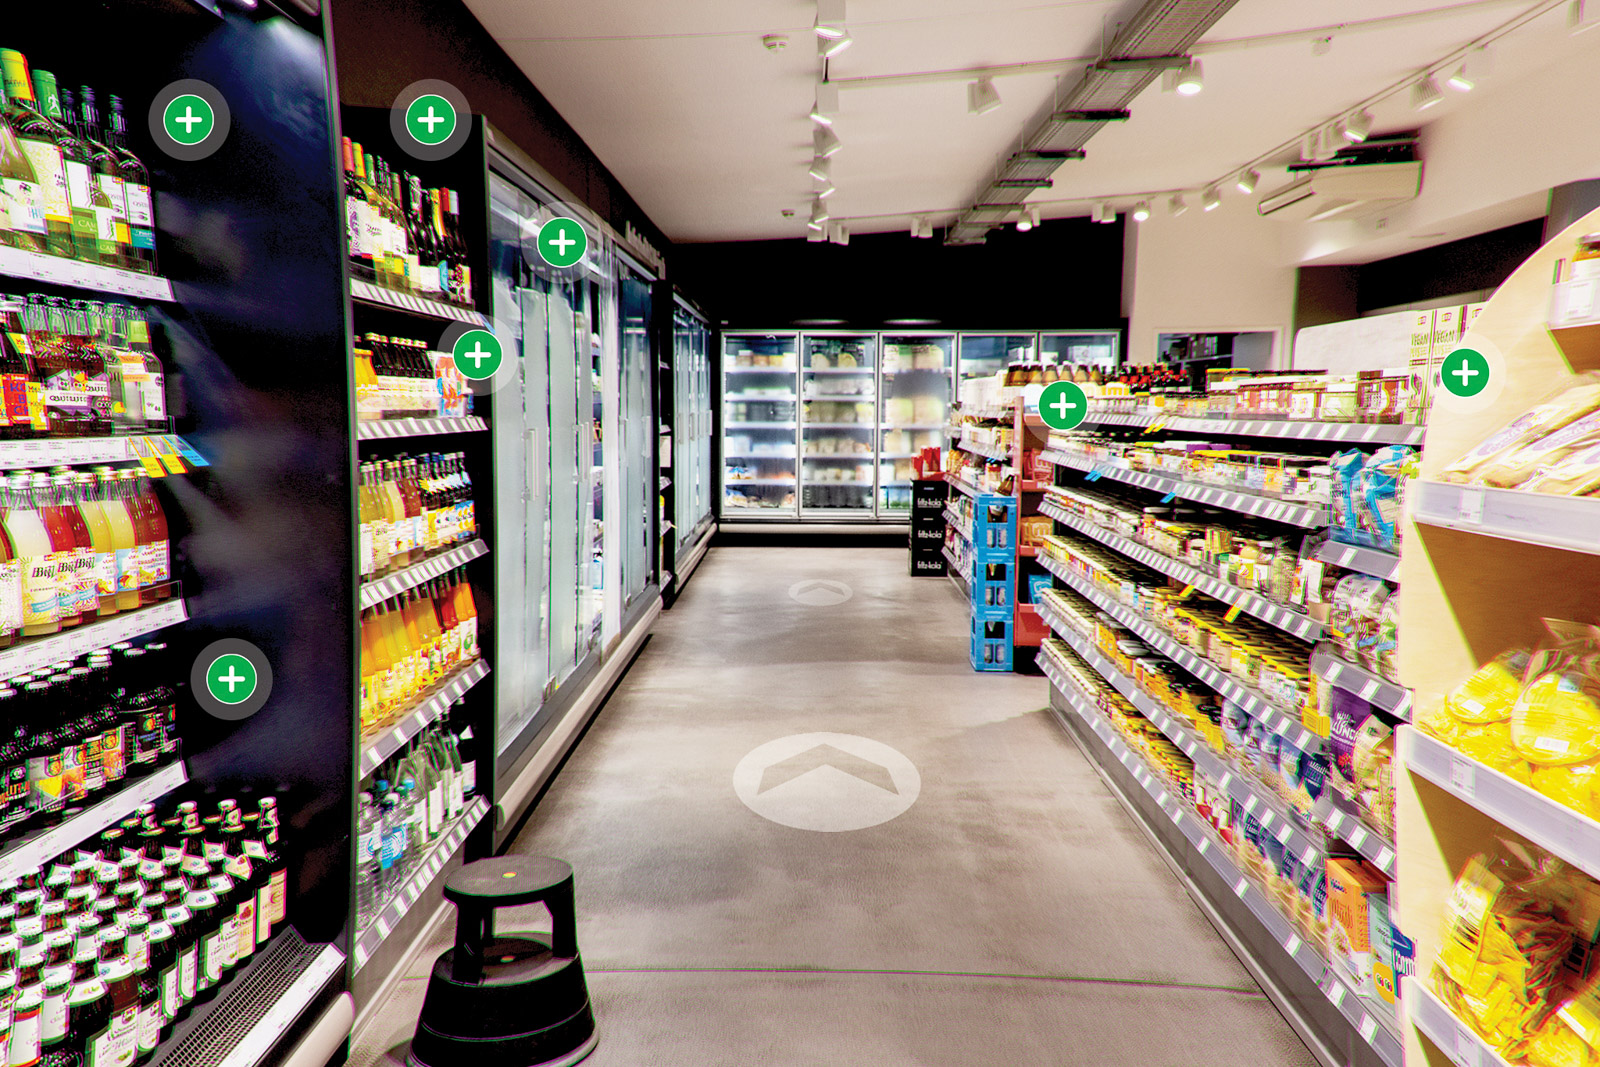 Grocery store with VR enabled features